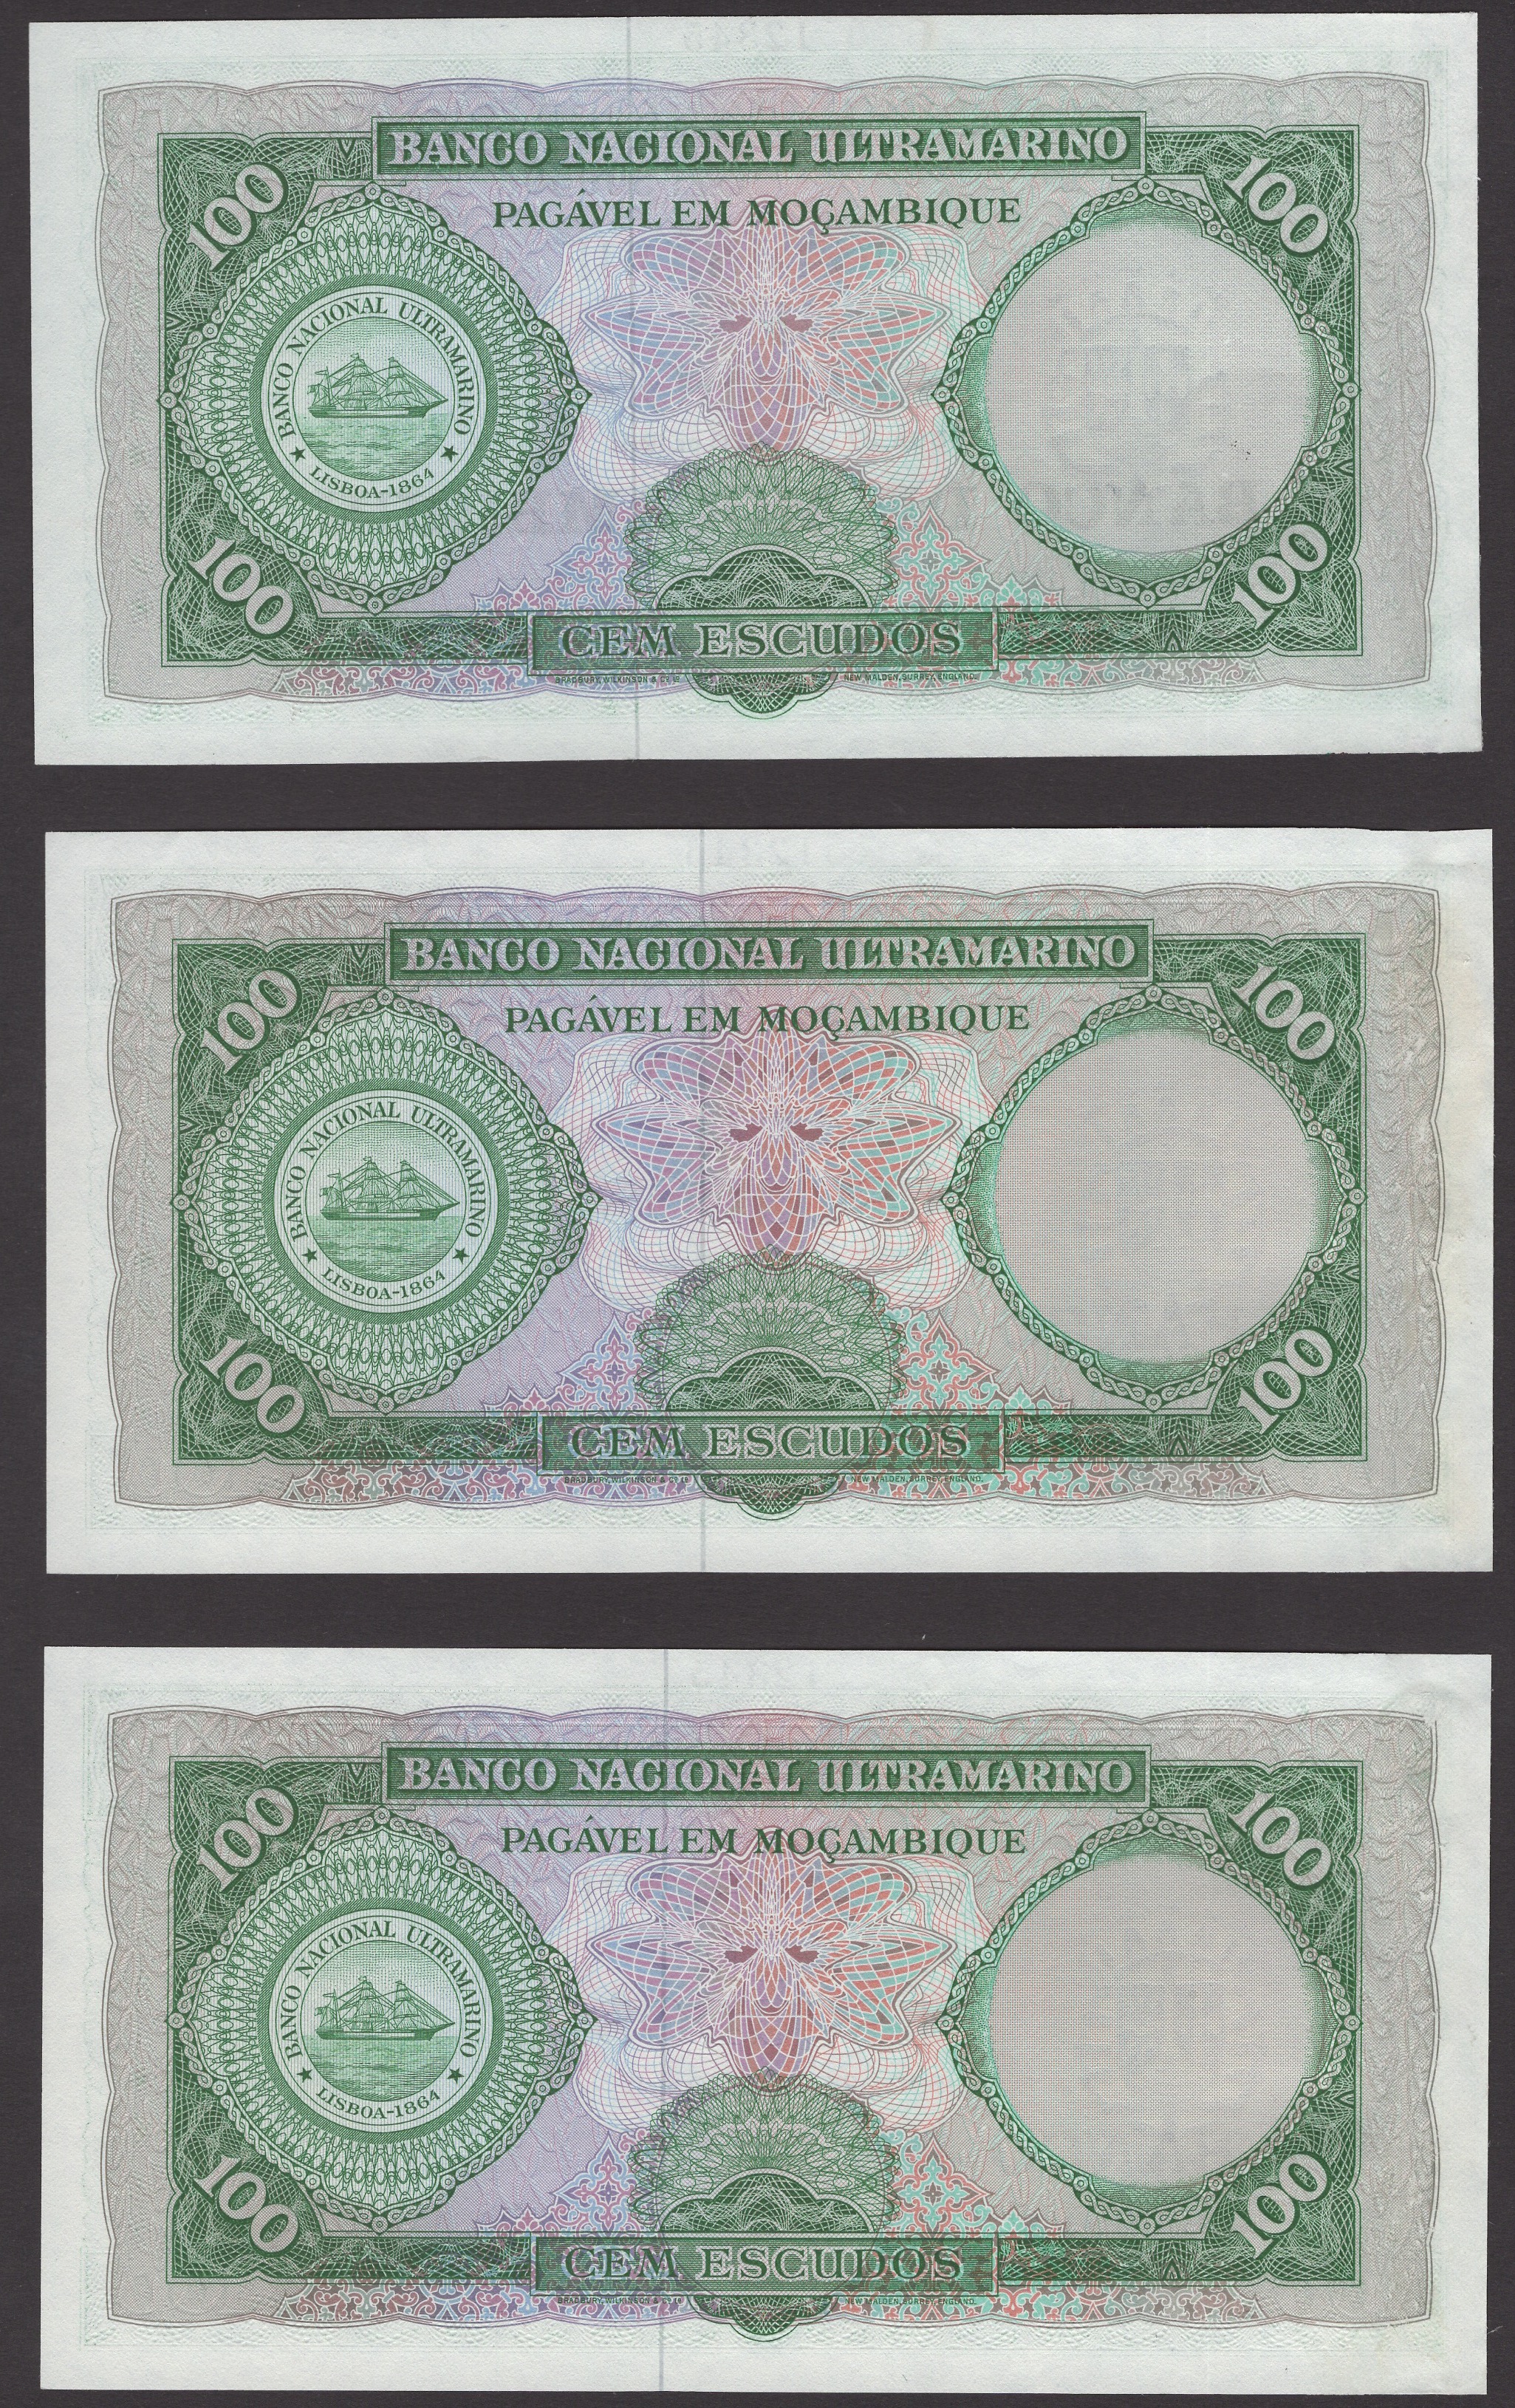 Banco de Mocambique, a remarkable full range of specimens and proofs for the overprinted... - Image 2 of 8